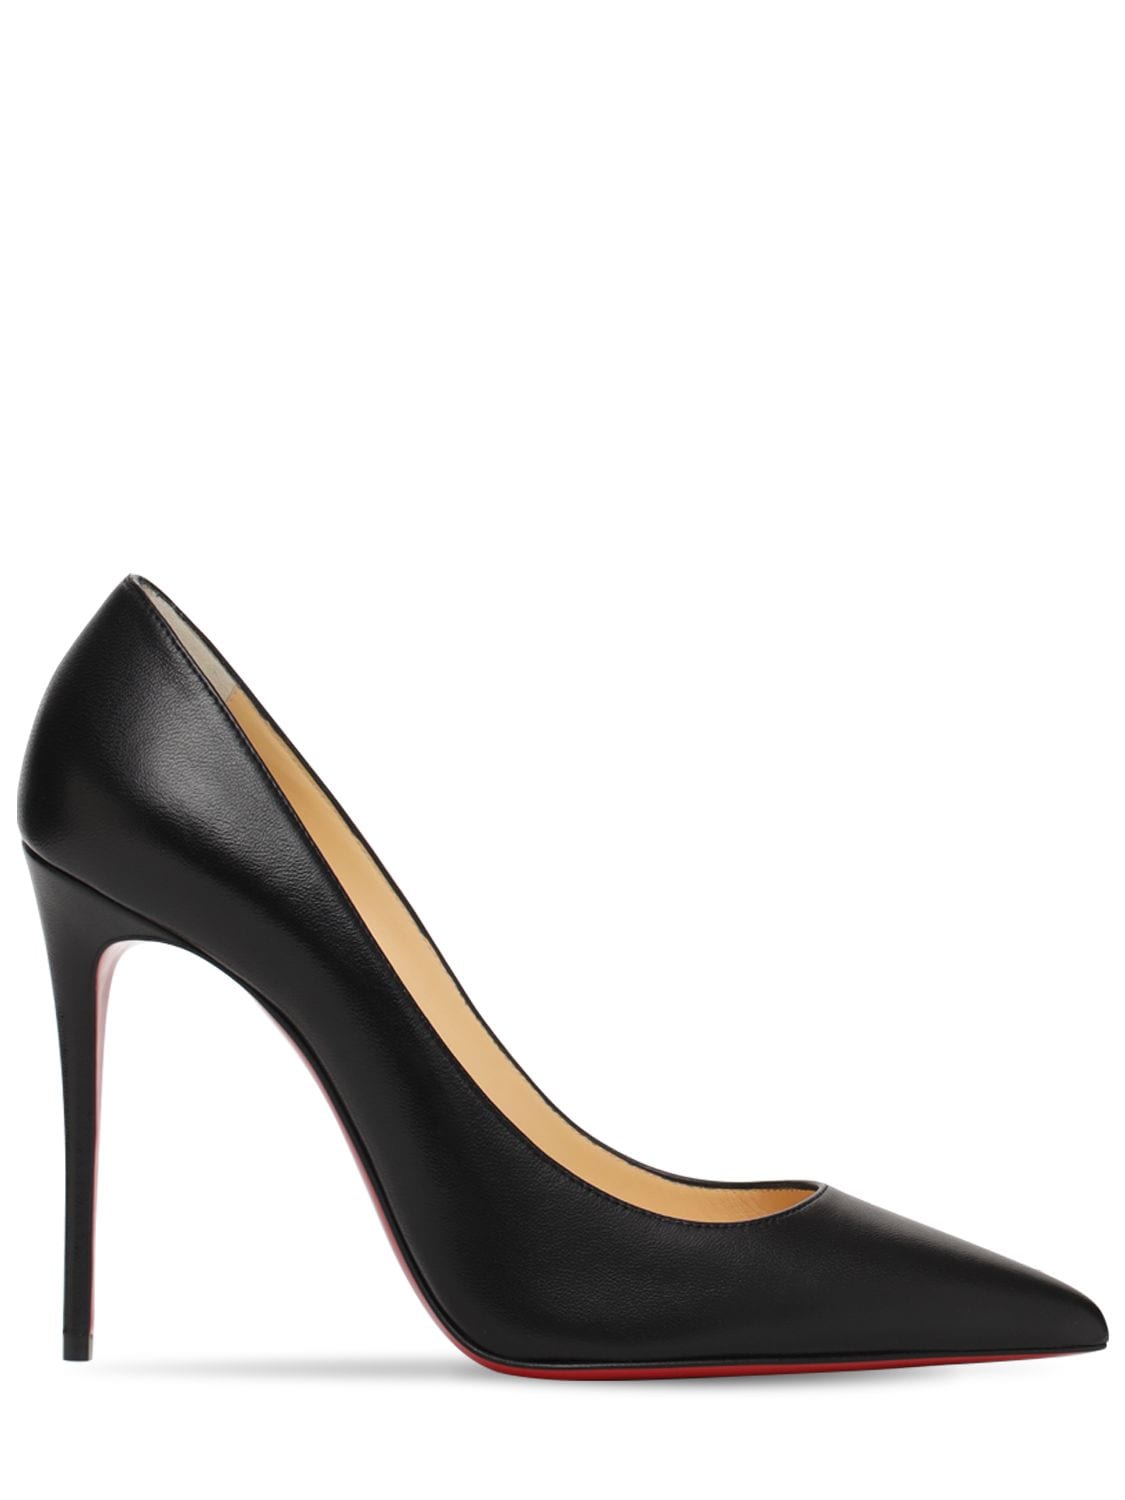 CHRISTIAN LOUBOUTIN 100mm Kate Leather Pumps